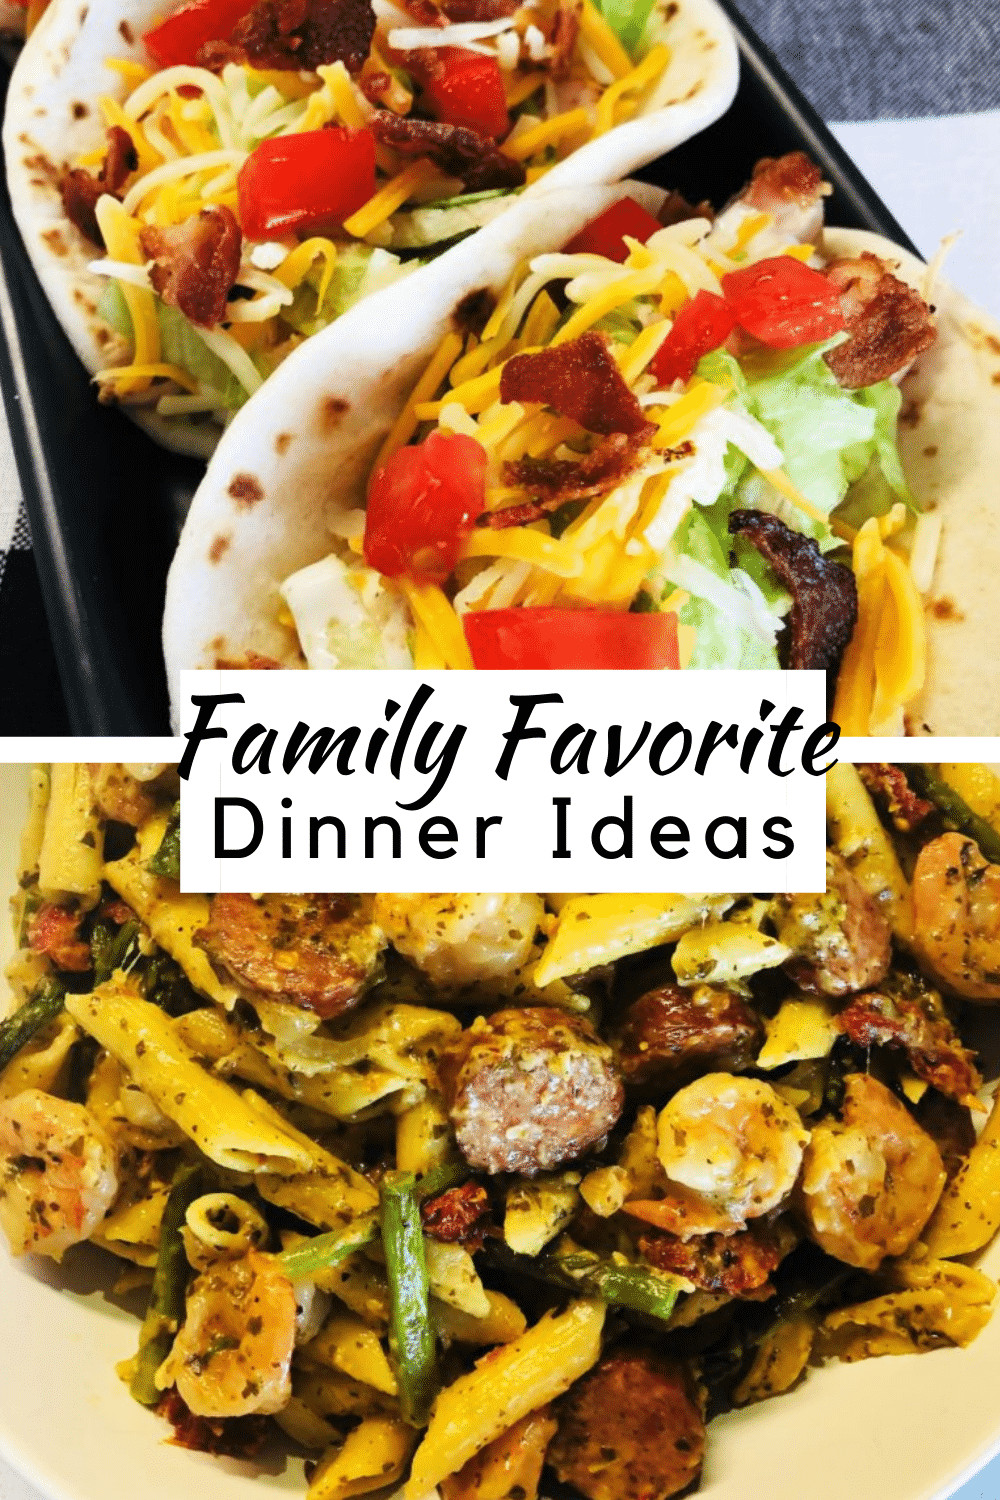 Kids Favorite Dinners Inspirational Family Favorite Dinners Cooks Well with Others